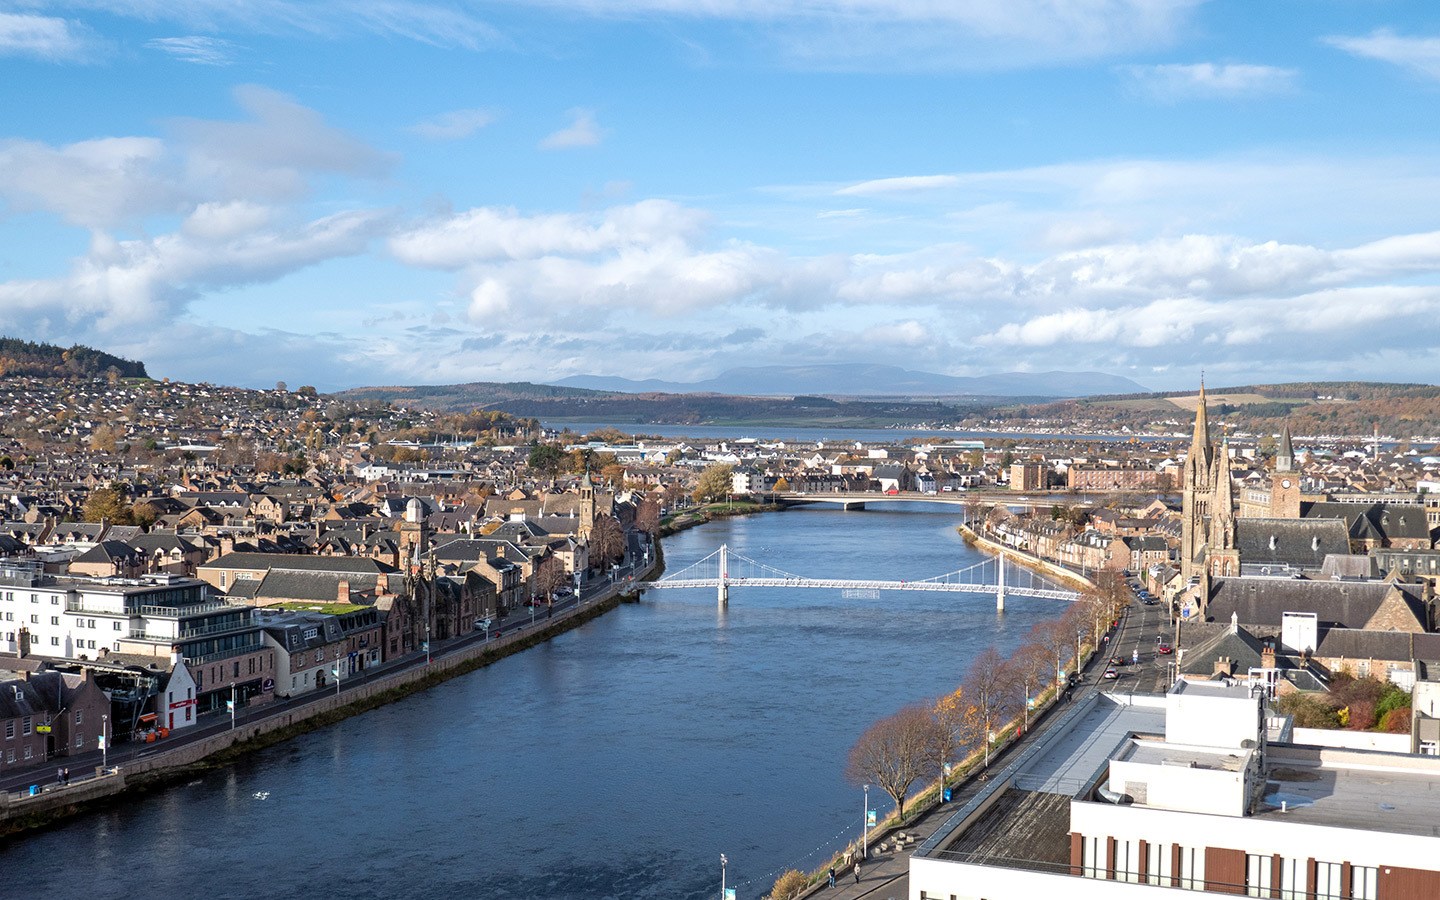 Views from the Inverness Castle Viewpoint in Inverness, Scotland